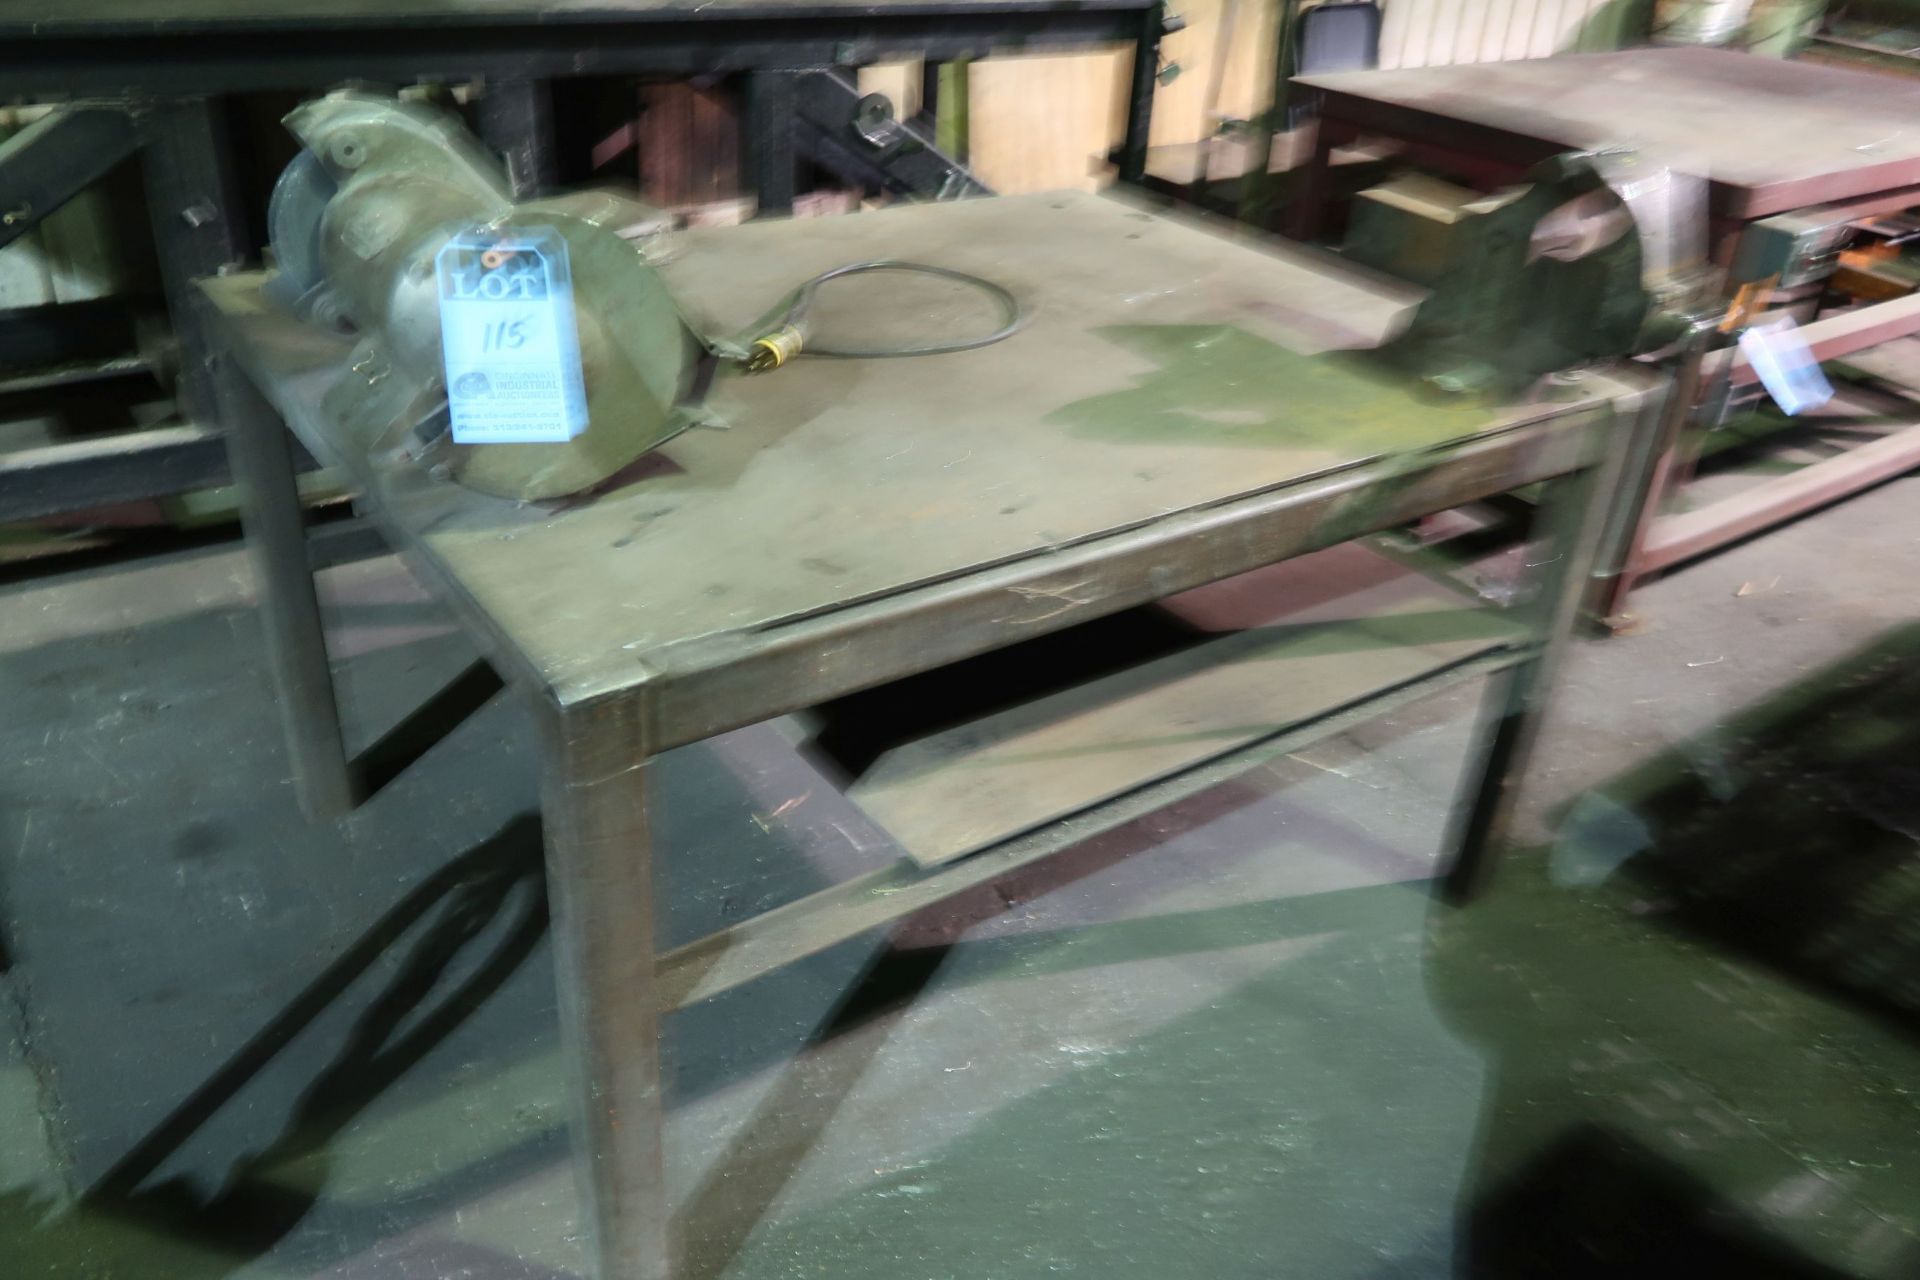 41" X 53" STEEL TABLE WITH 4" VISE AND DE GRINDER